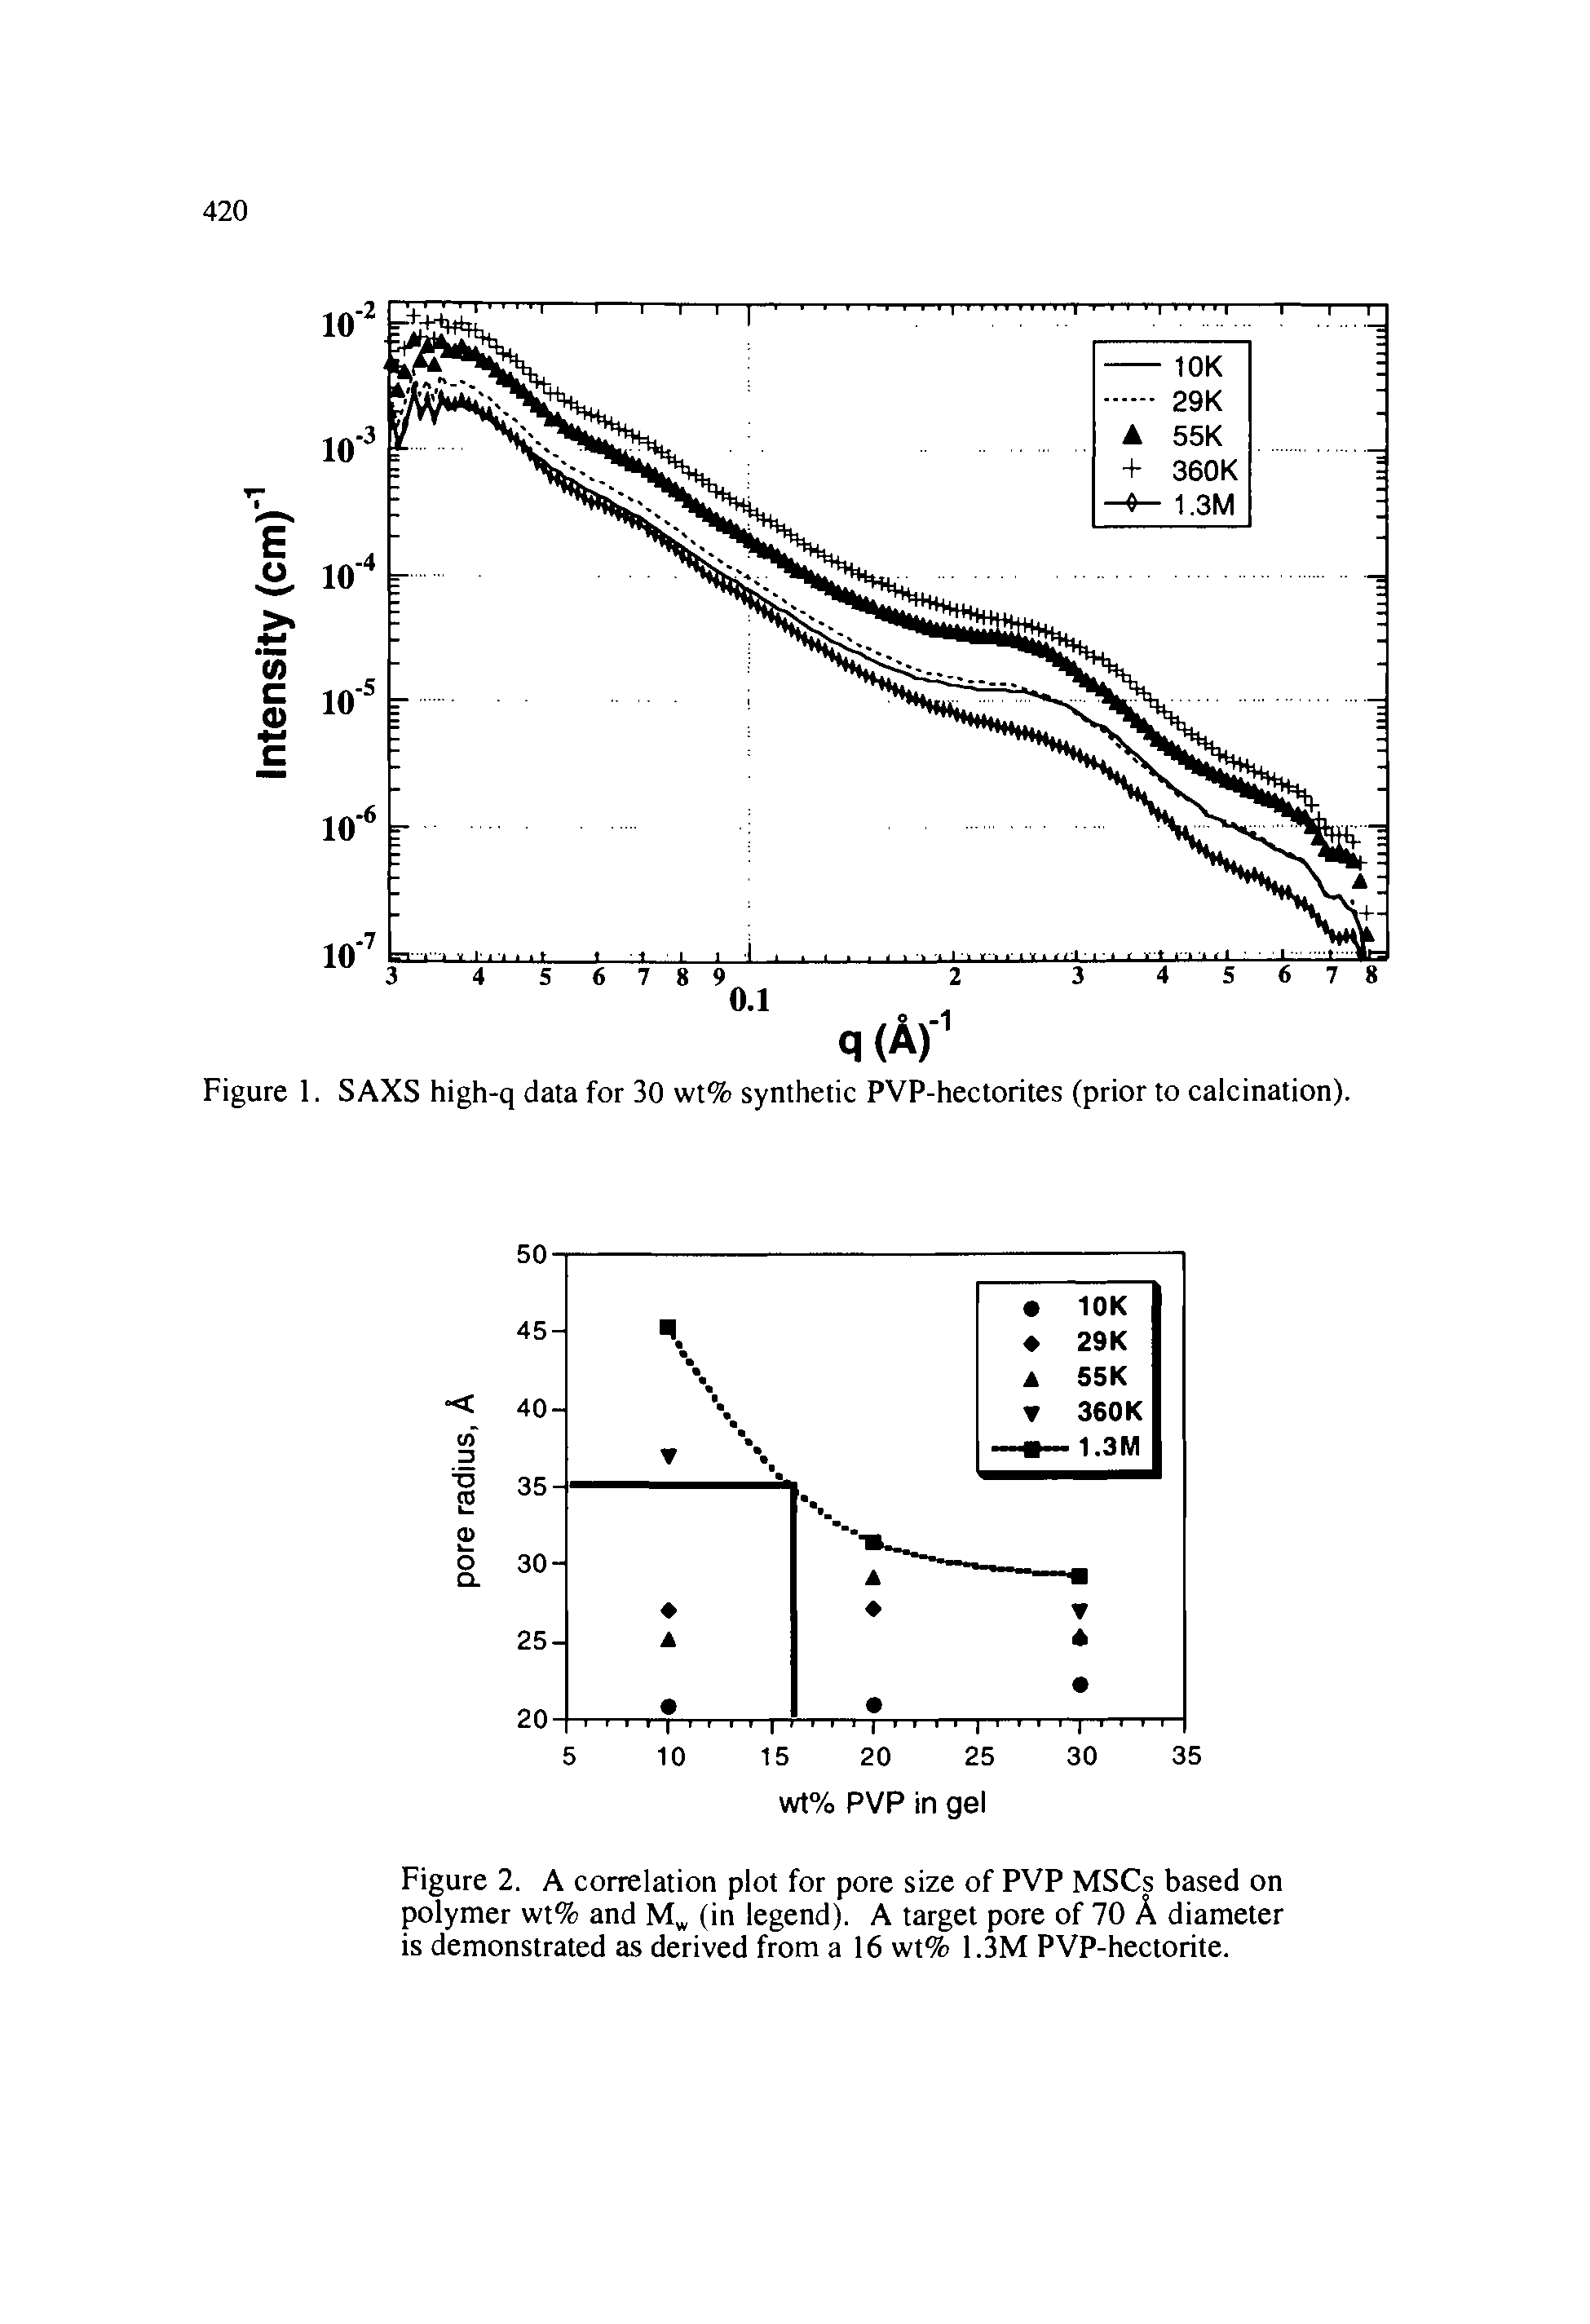 Figure 1. SAXS high-q data for 30 wt% synthetic PVP-hectorites (prior to calcination).